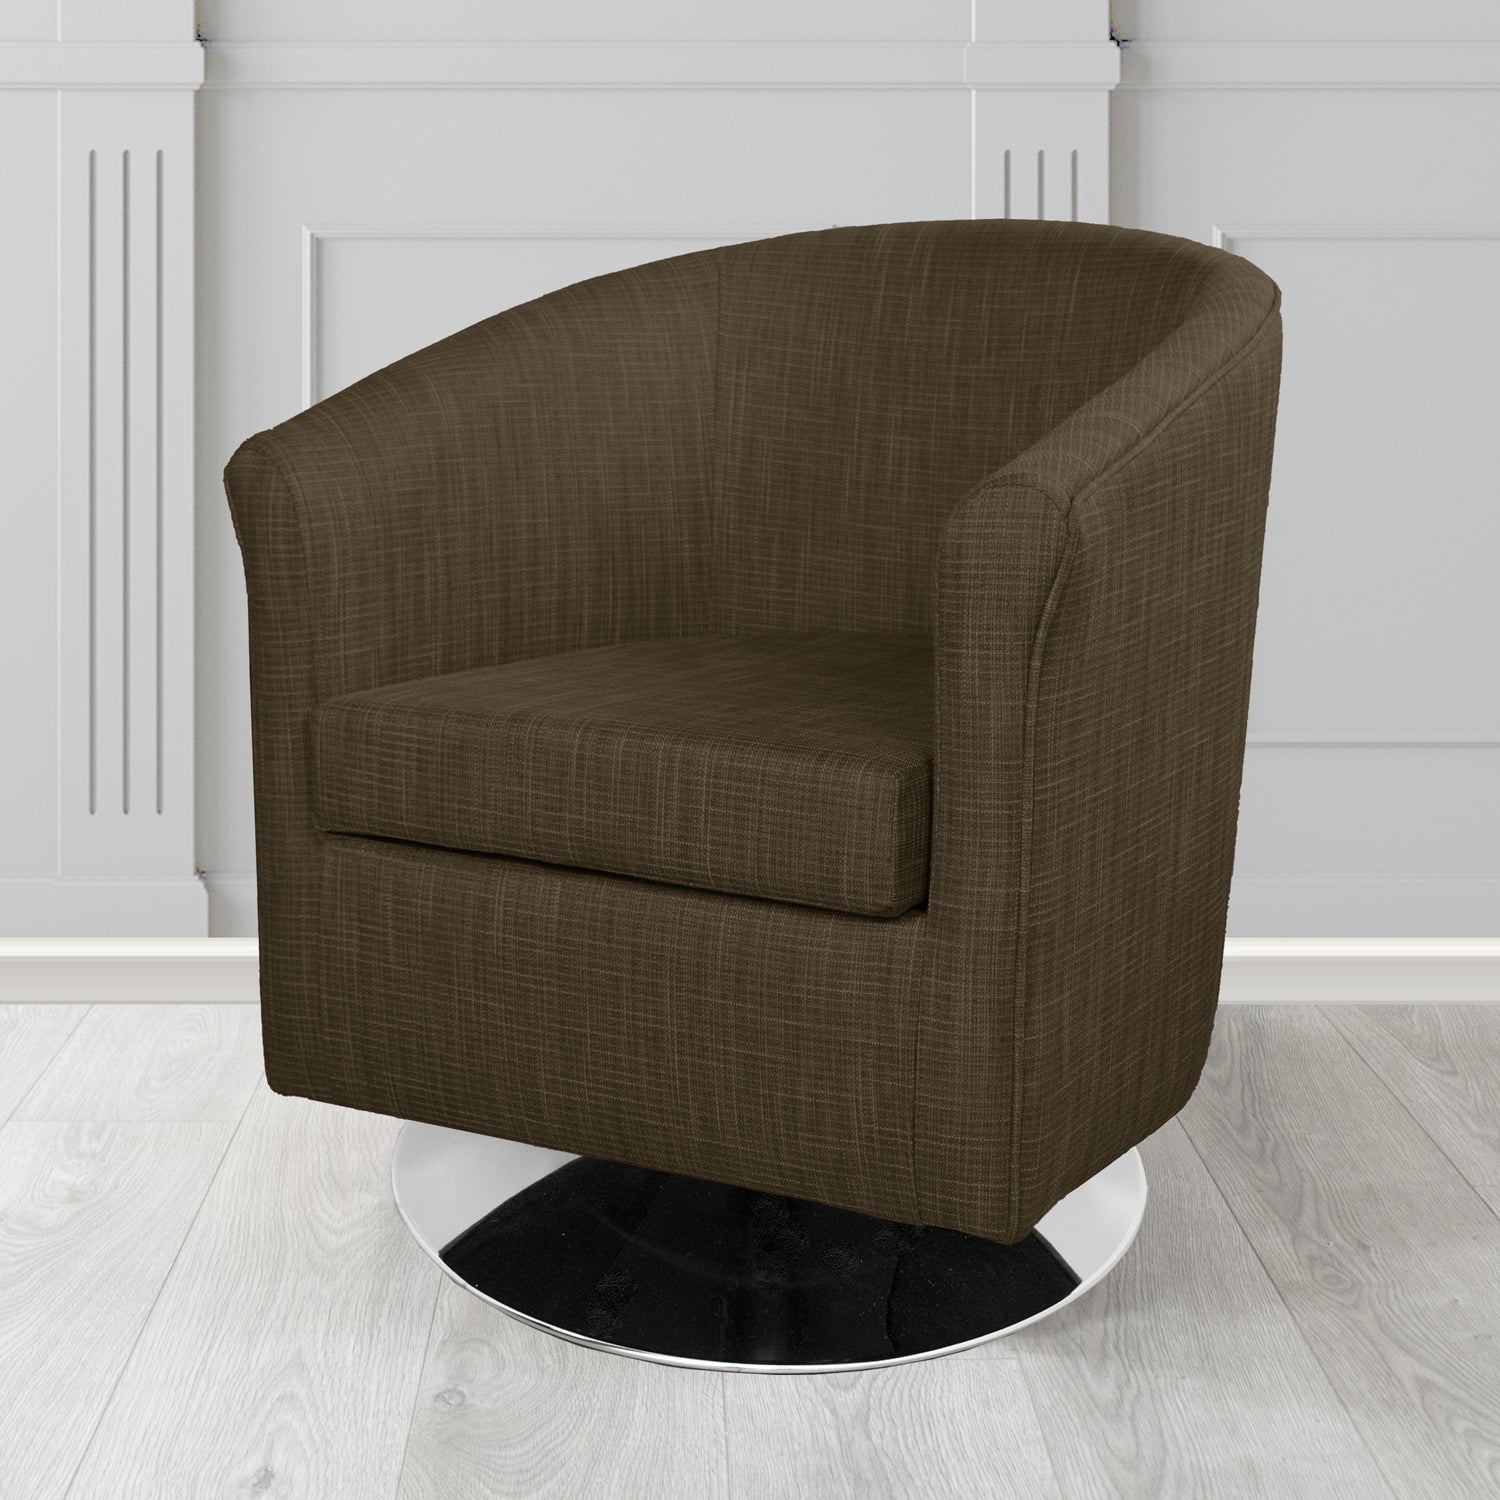 Tuscany Ravel Ganache Contract Crib 5 Fabric Swivel Tub Chair - Antimicrobial & Water-Resistant - The Tub Chair Shop